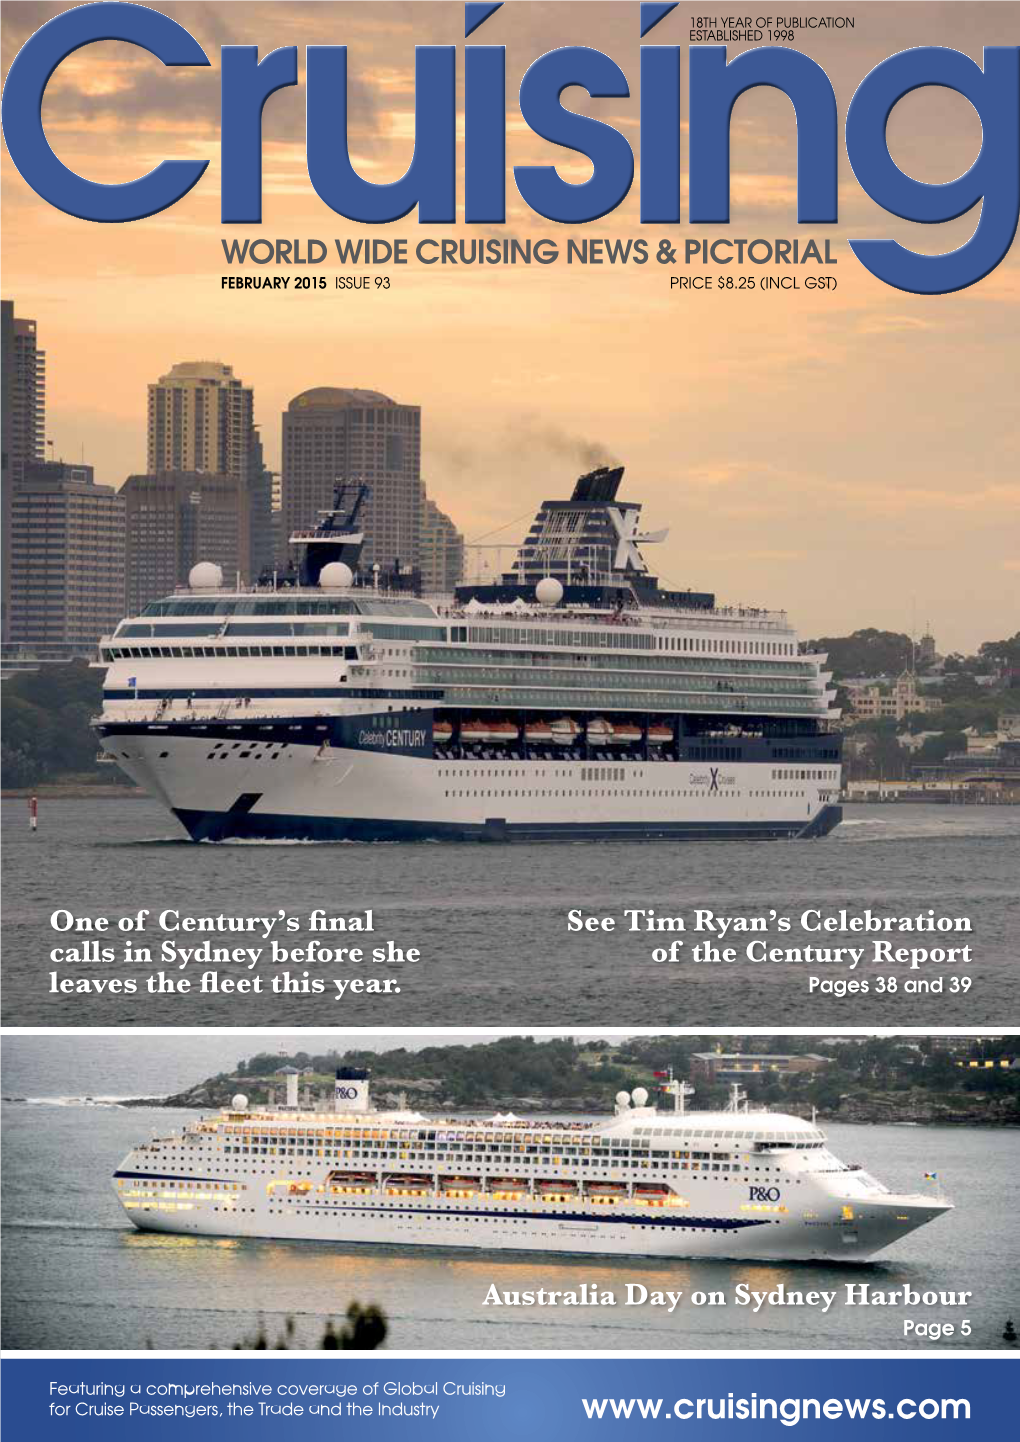 February 2015 Issue 93 Price $8.25 (Incl Gst)